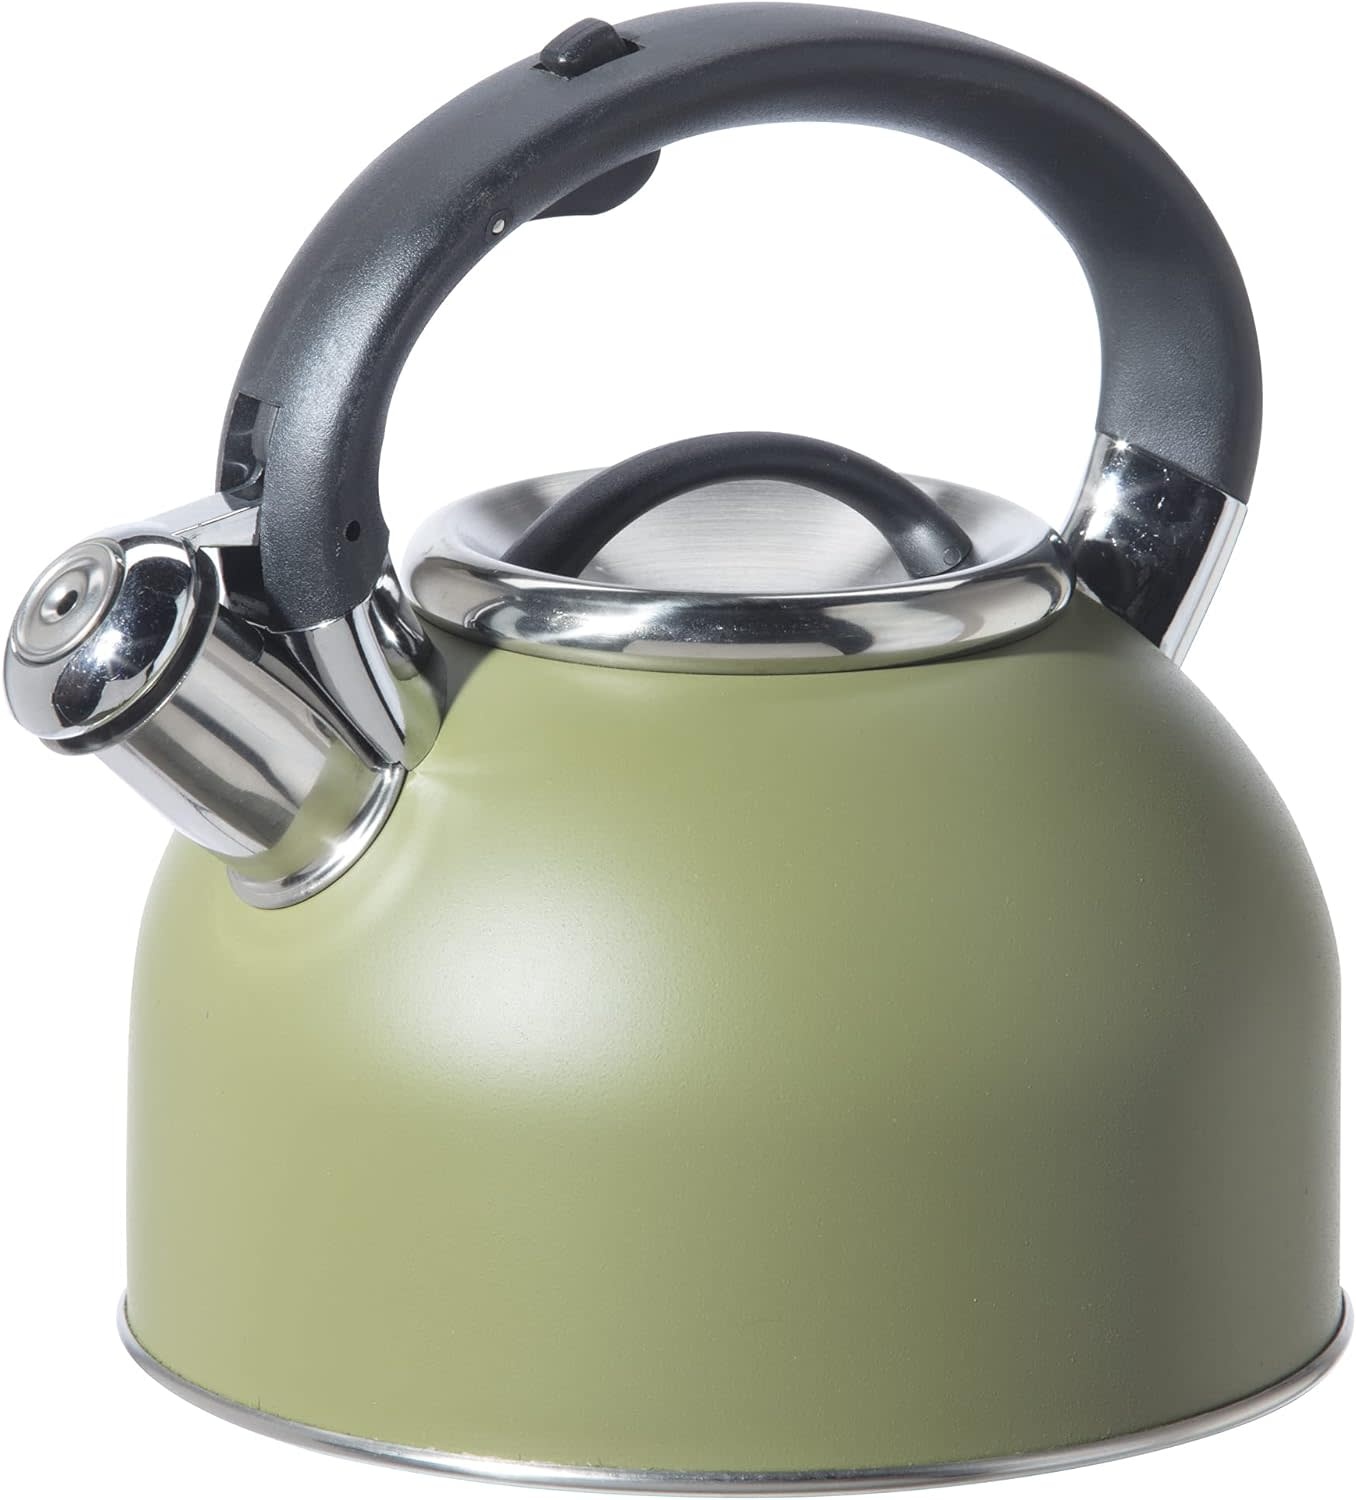 Stainless Steel Tea Pot Tea Kettle for Stove Top Whistling Teapot, 2.5L  Green